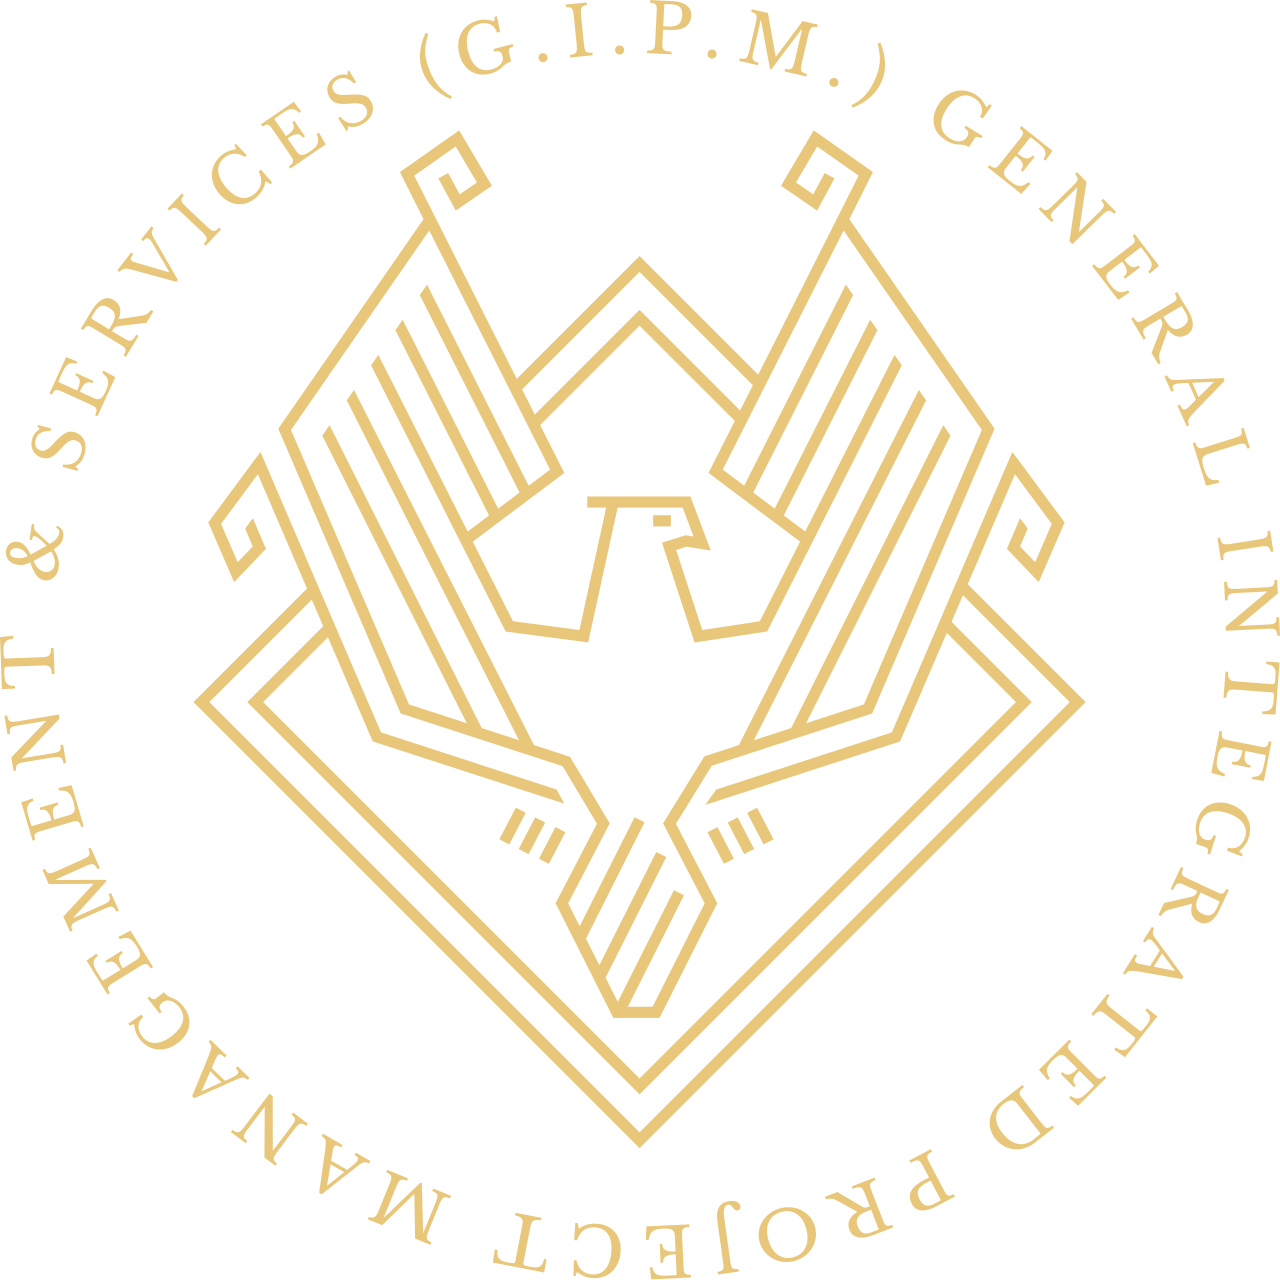 (G.I.P.M.) GENERAL INTEGRATED PROJECT MANAGEMENT & SERVICES 's logo